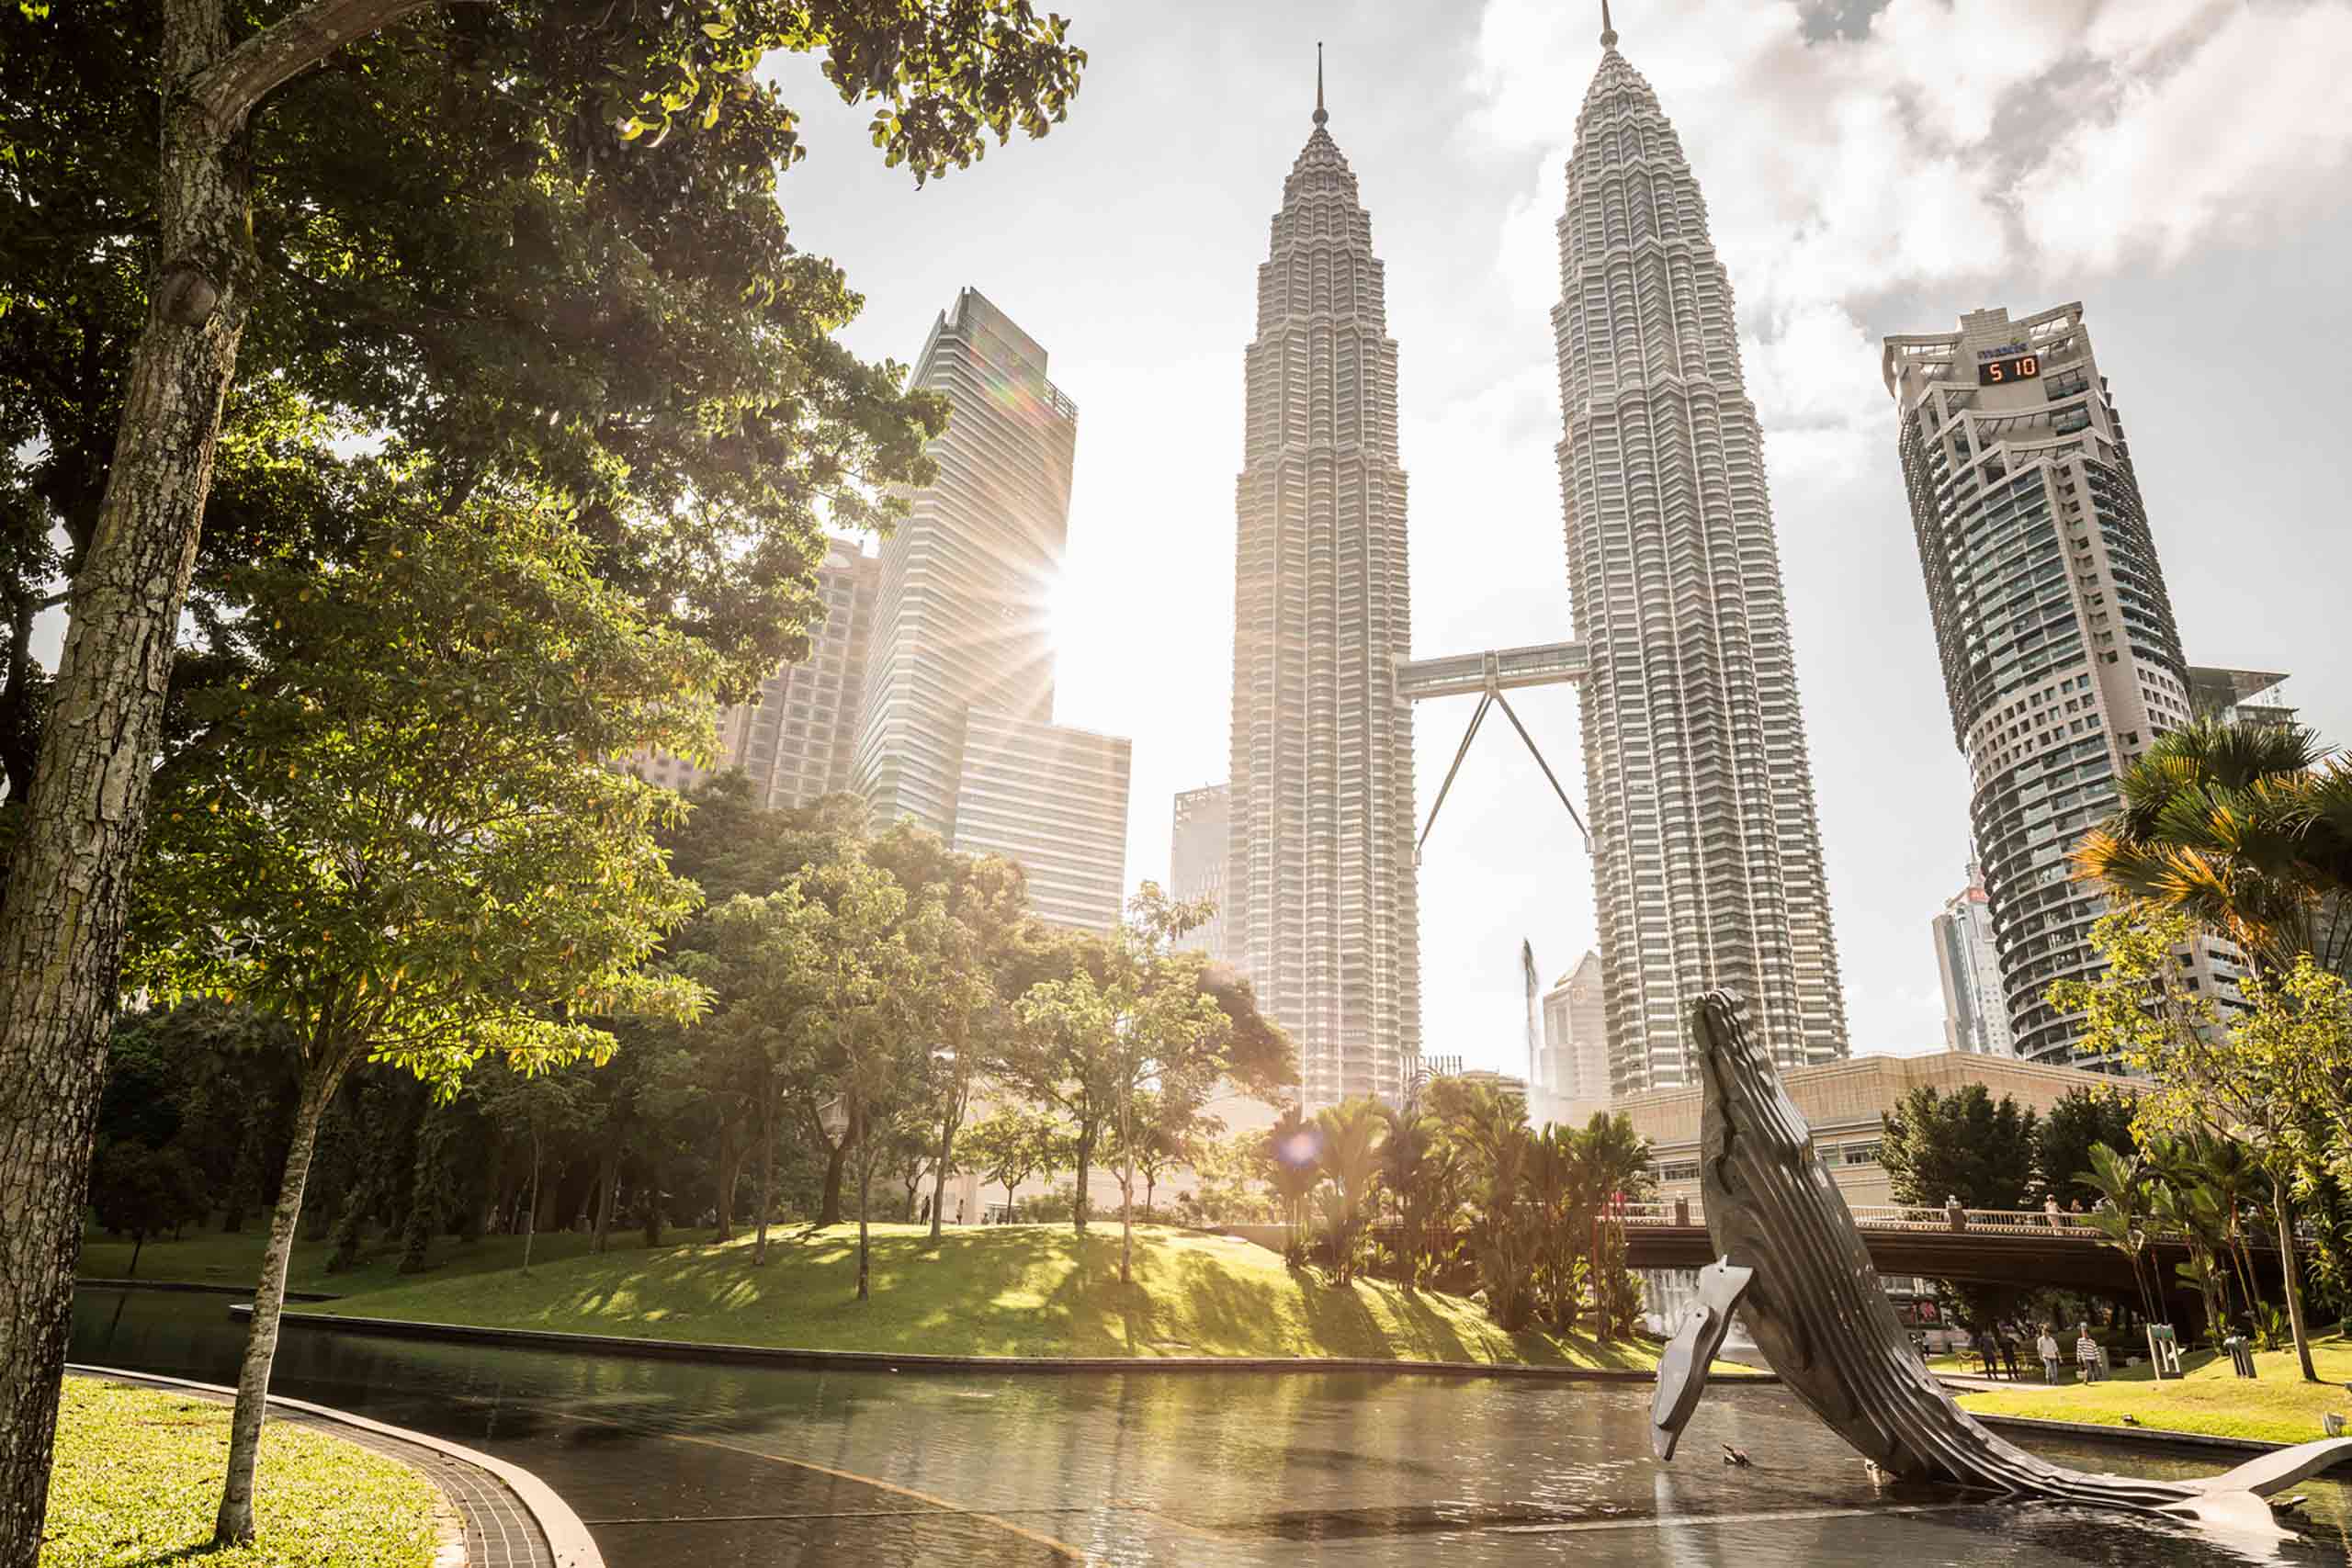 View of the Petronas Twin Tower and KLCC from the Four Seasons Kuala Lumpur, Malaysia